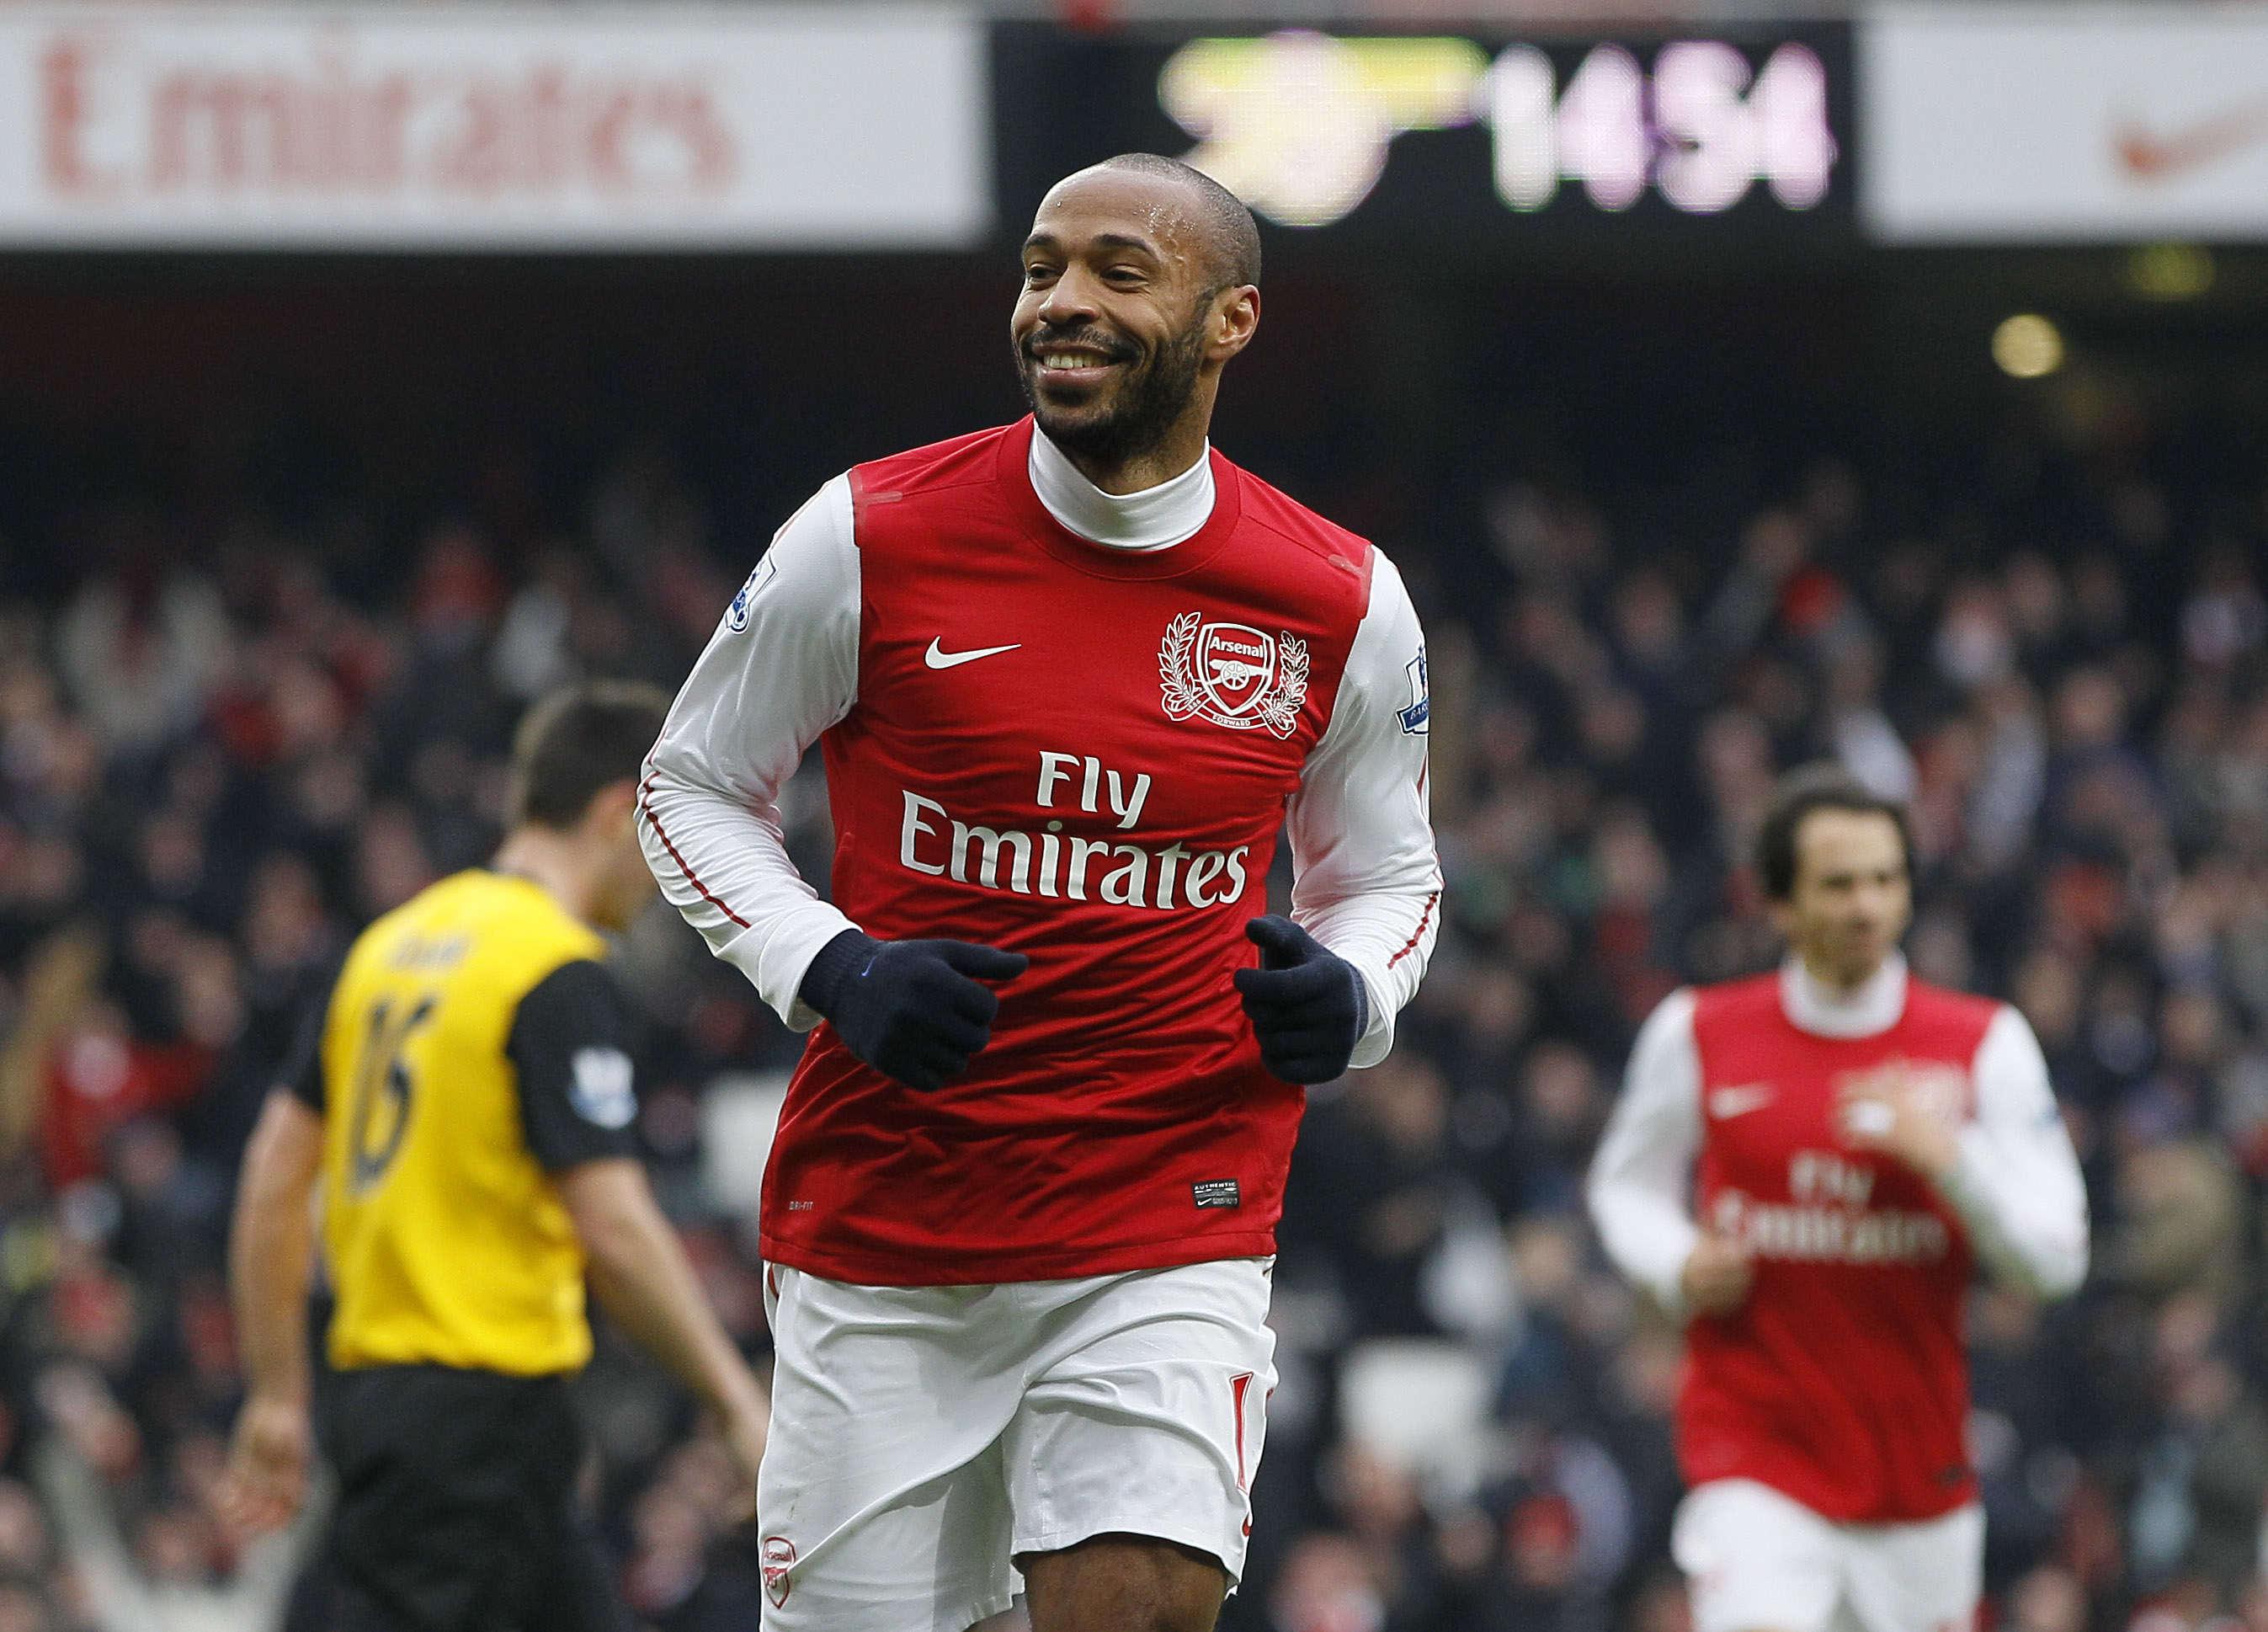 Arsenal Legend, Thierry Henry, Will Visit Kenya In December